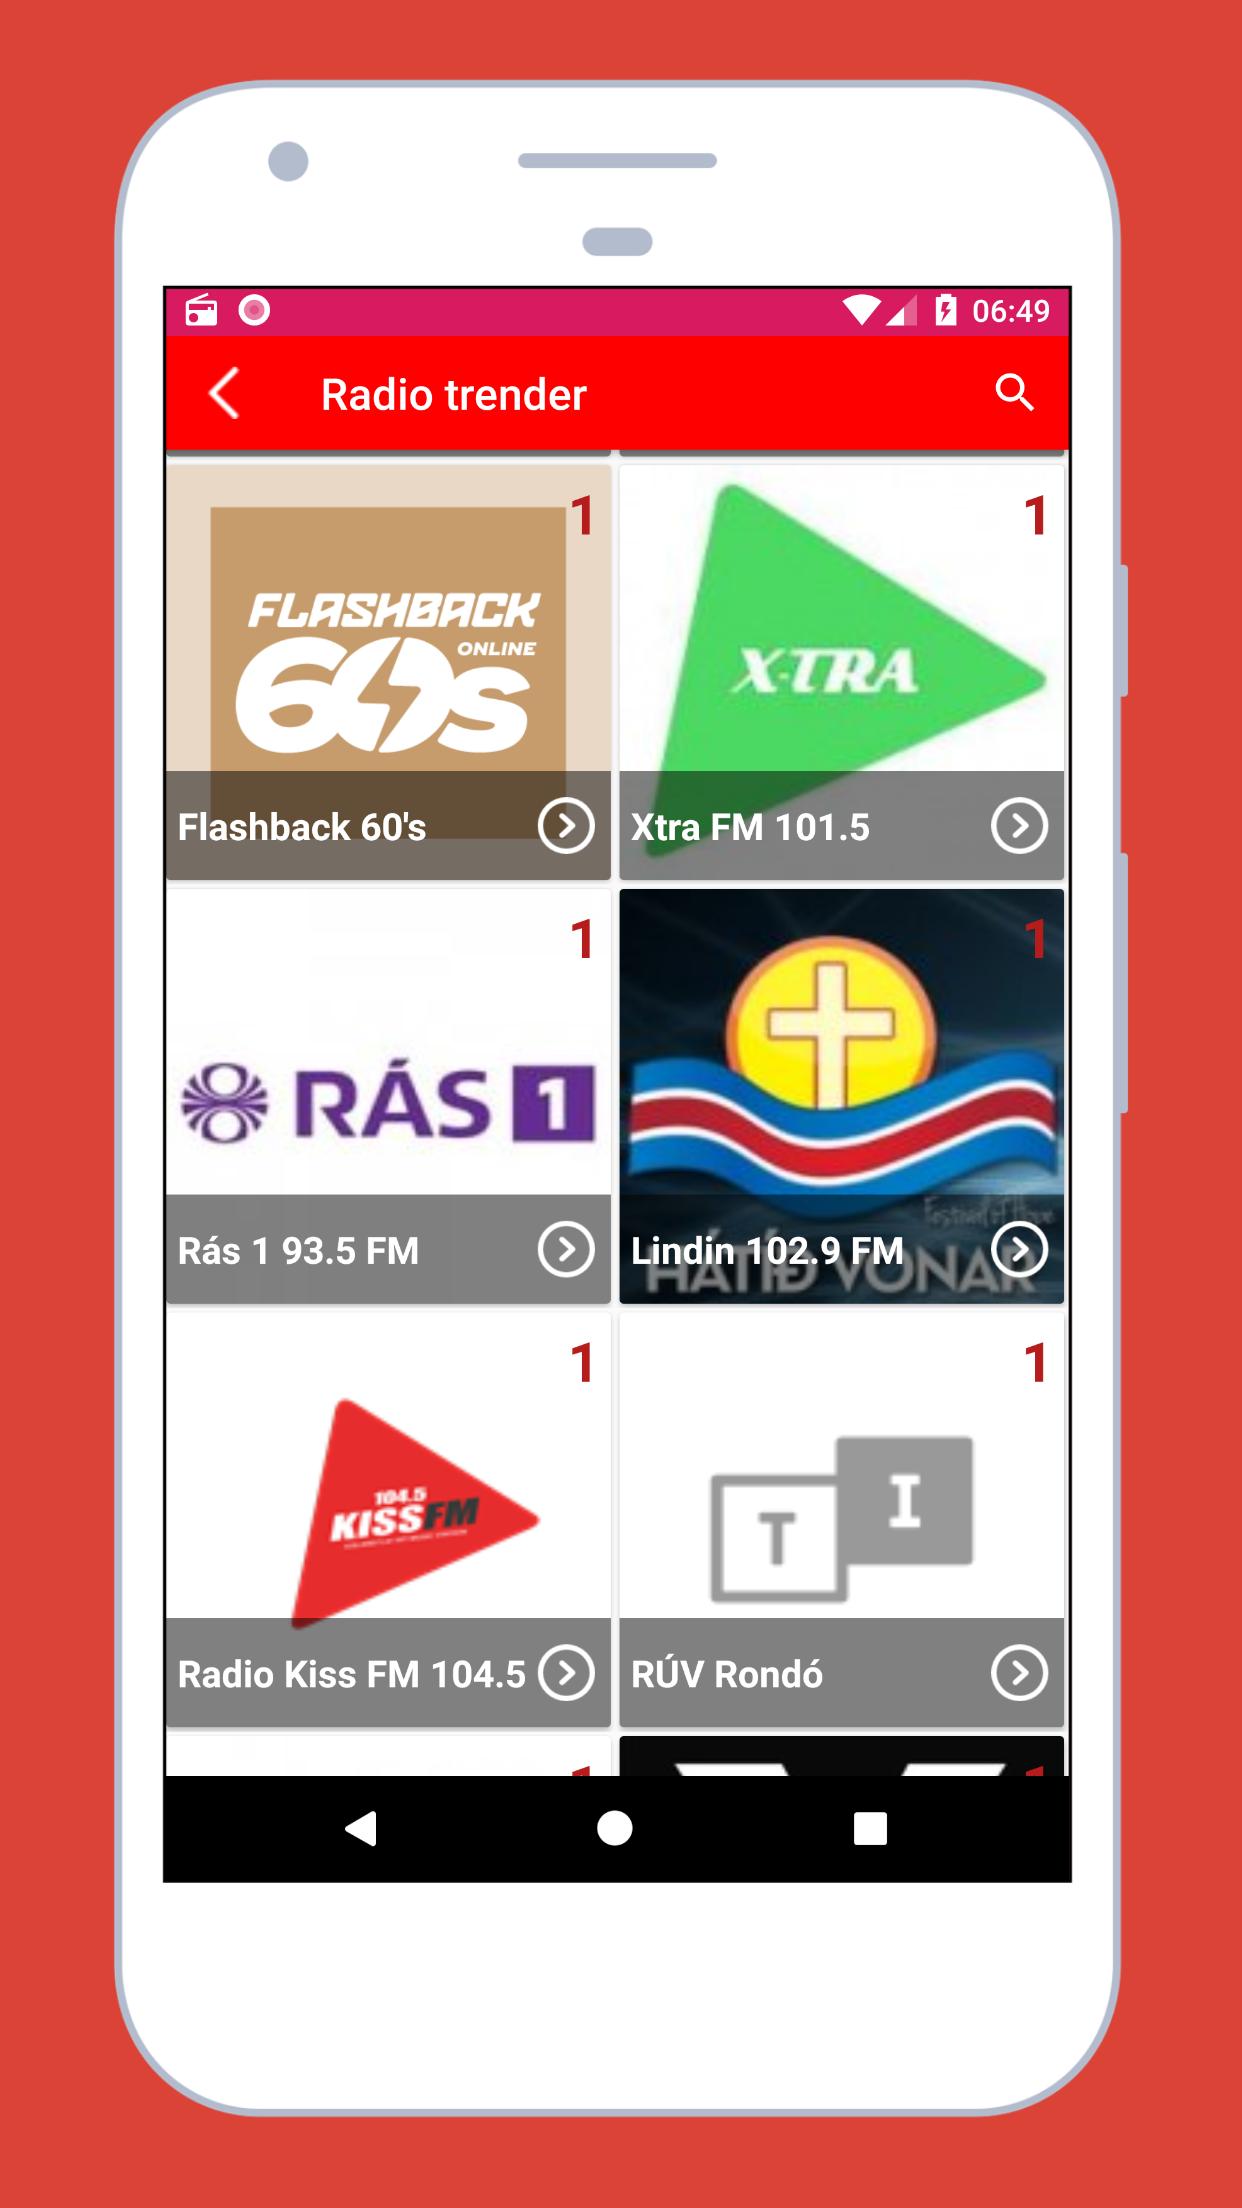 Radio Iceland + Radio FM Iceland - Icelandic Radio for Android ...